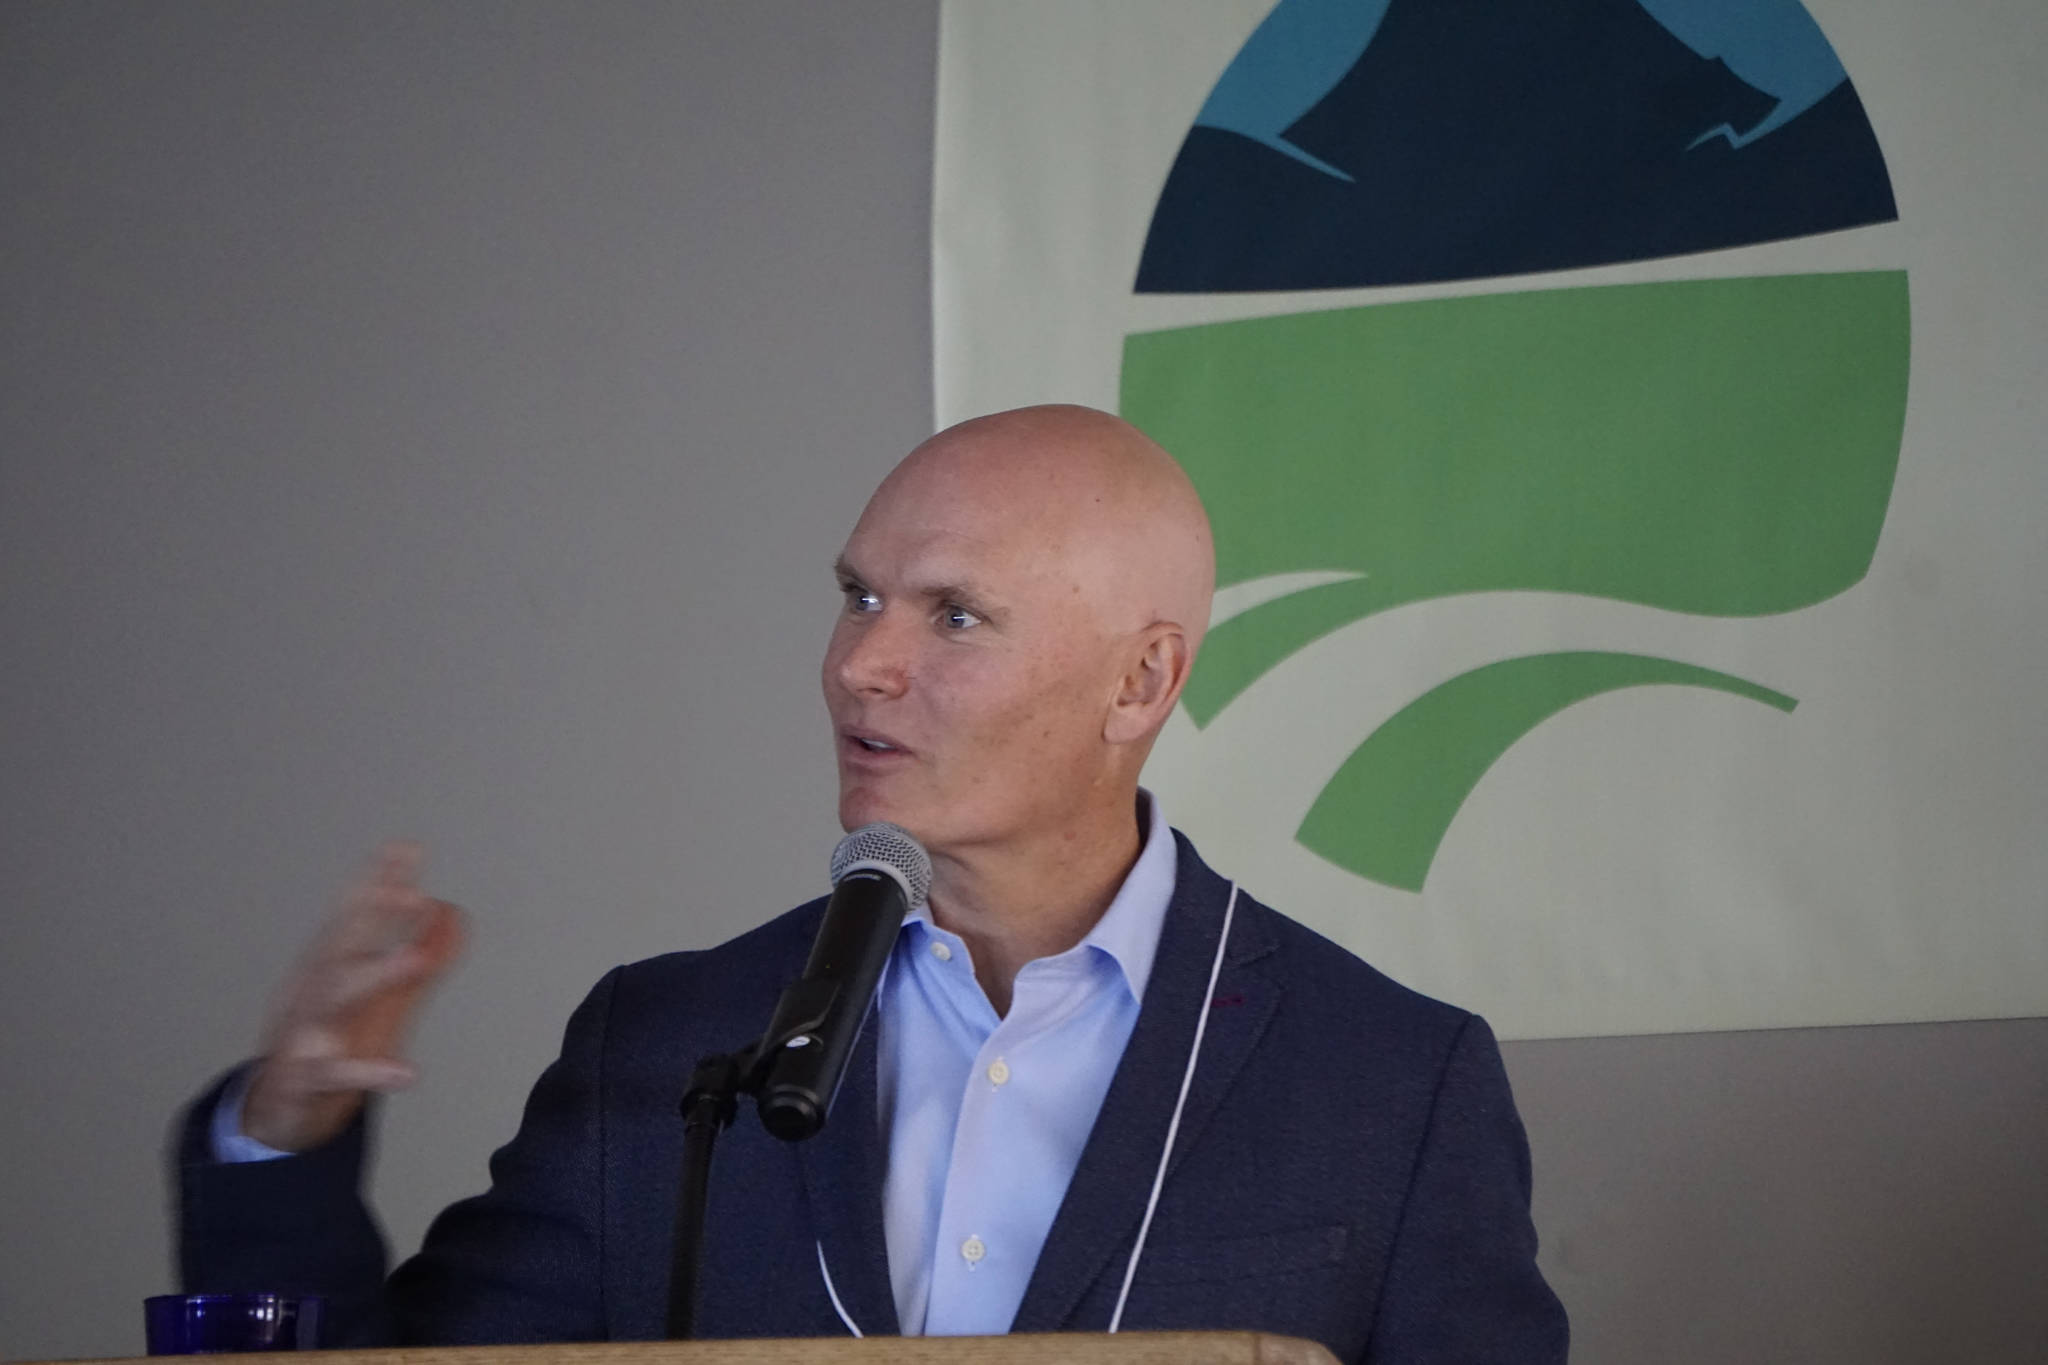 Kachemak Bay Writers’ Conference keynote speaker Anthony Doerr delivers the opening address at the start of the annual conference last Friday, June 5, at Land’s End Resort. (Photo by Michael Armstrong/Homer News)